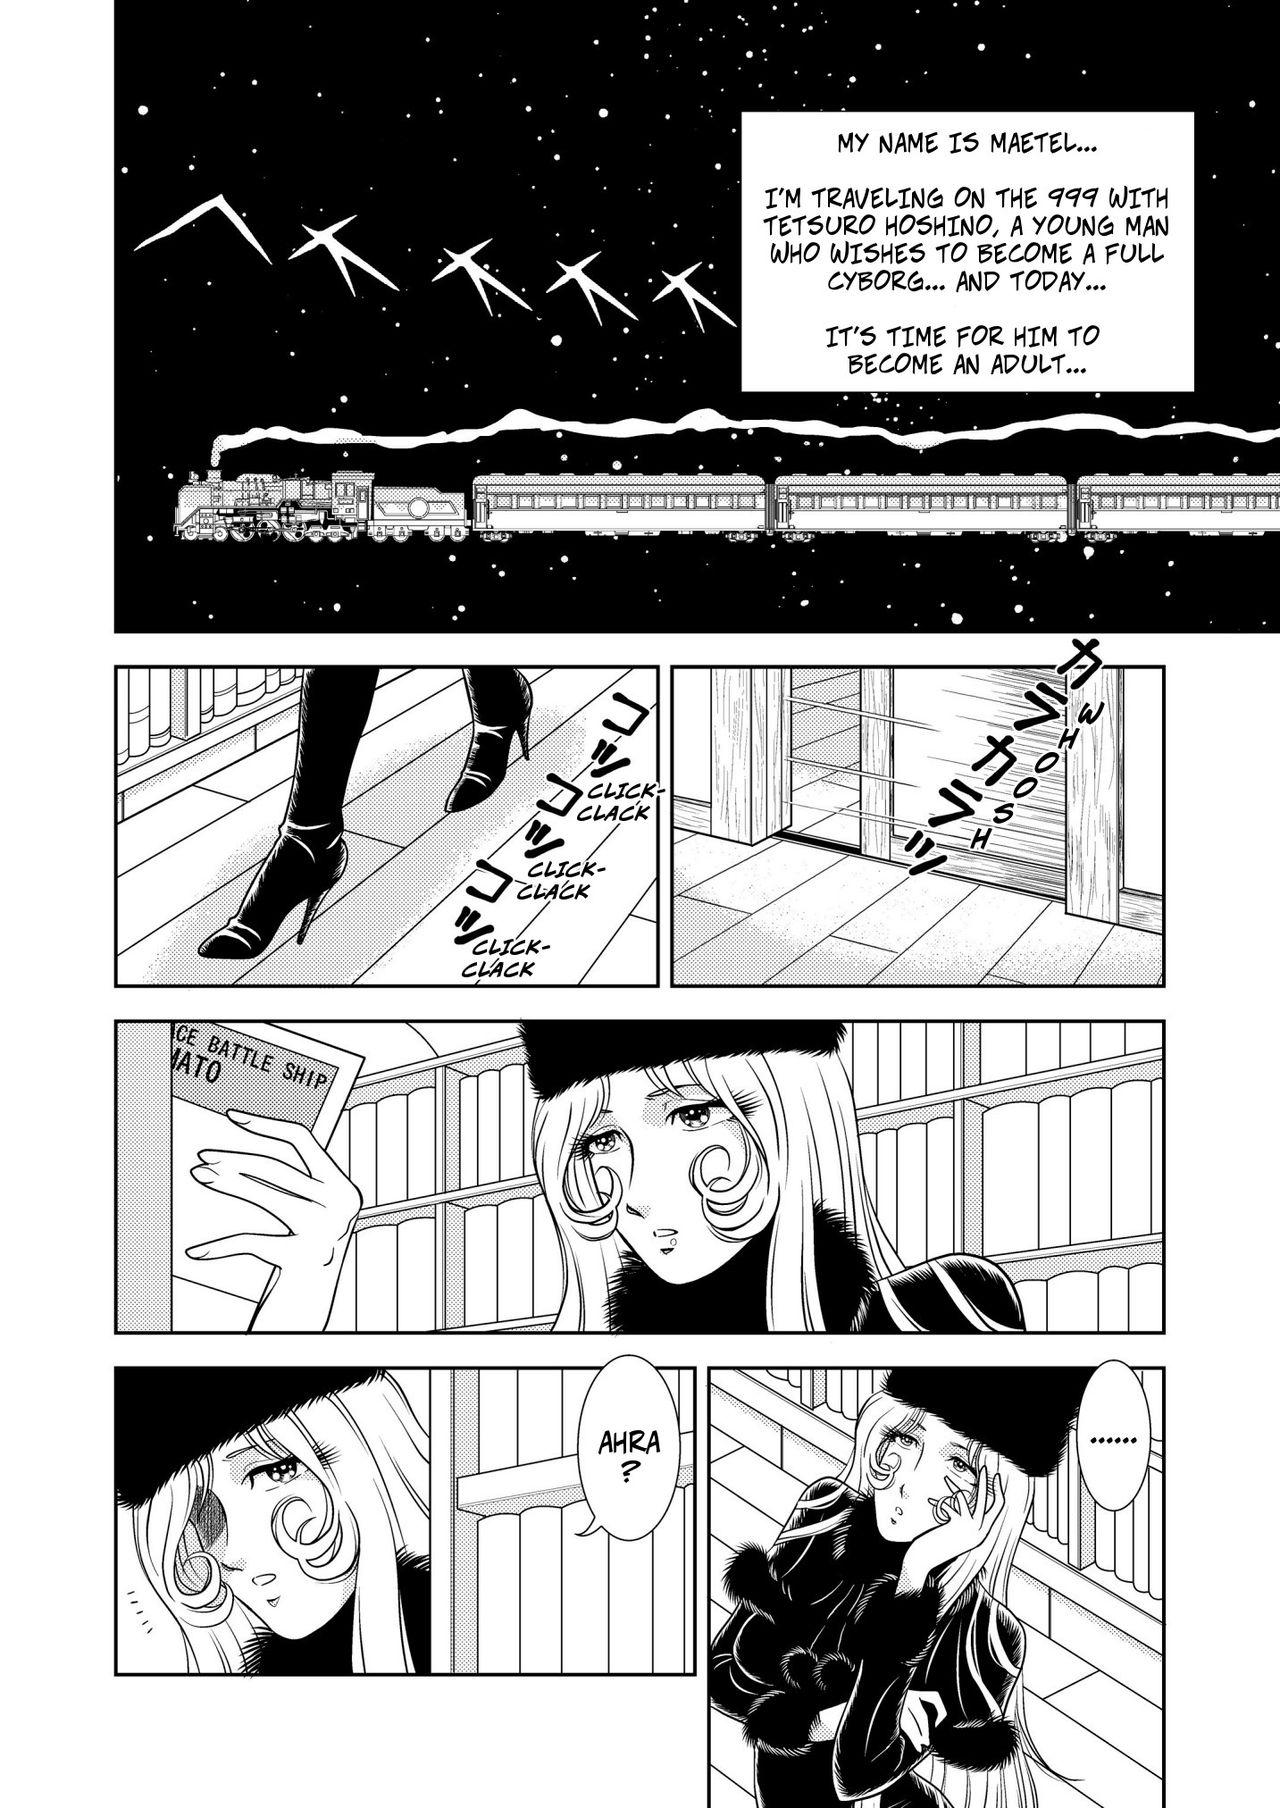 Amateur Free Porn Maetel Story 2 - Galaxy express 999 Ass Fuck - Page 2